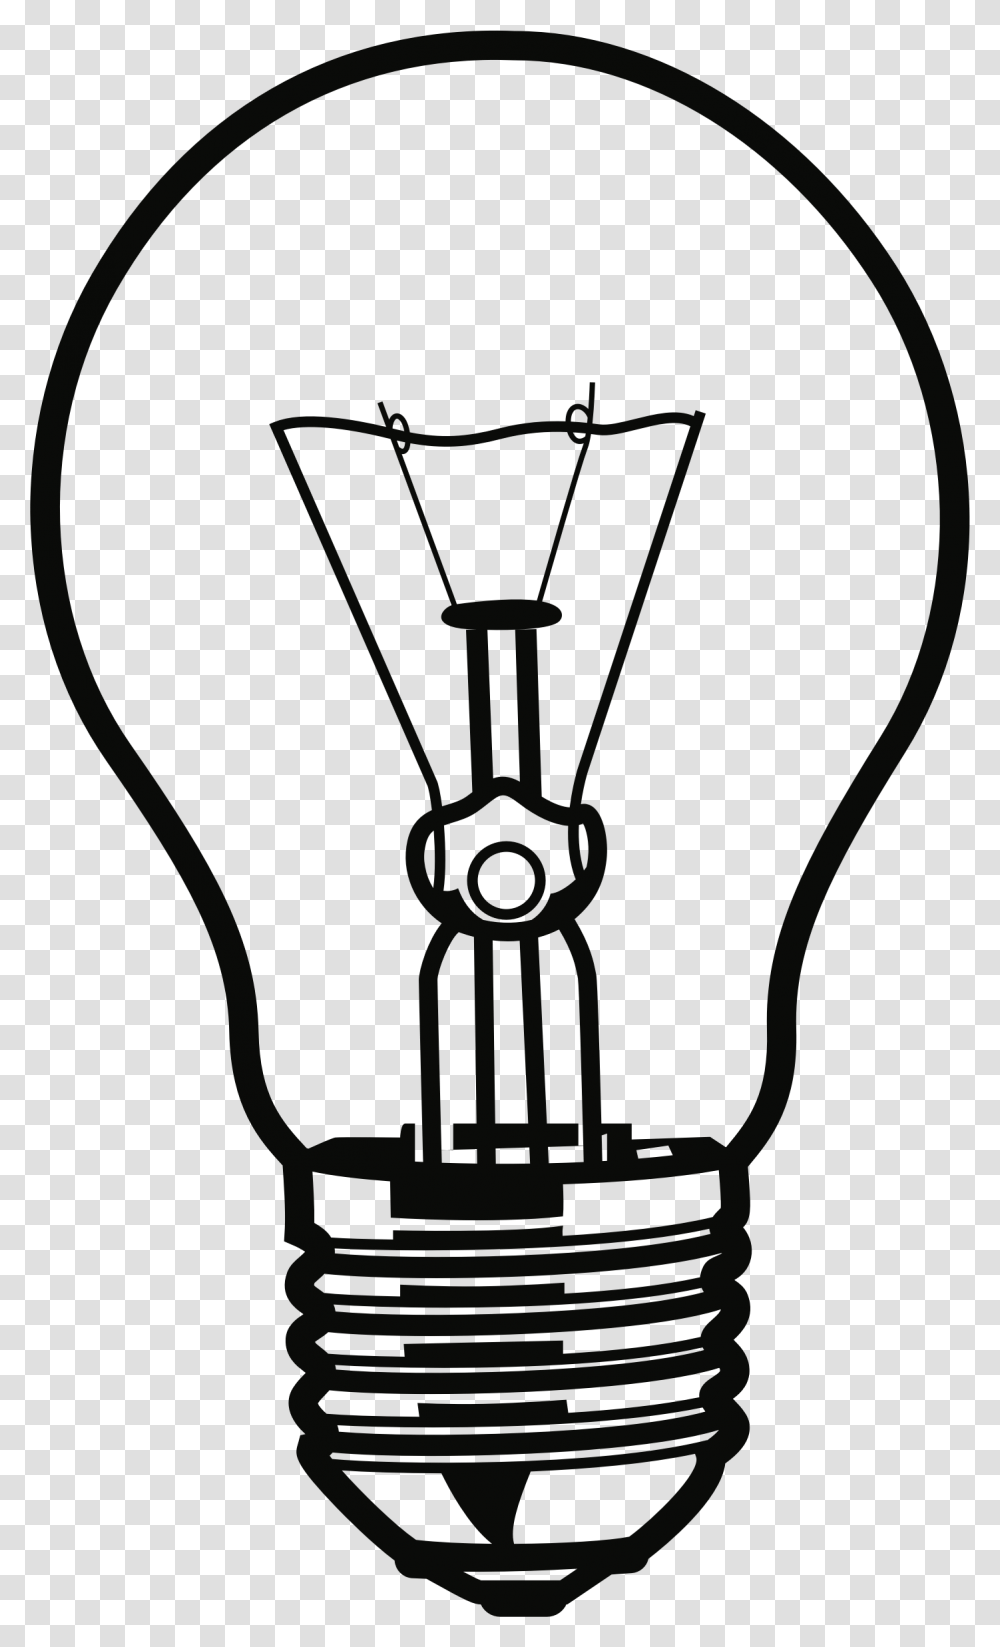 Clipart Black And White Download Onlinelabels Art Bulb Bulb Clip Art Black And White, Light Transparent Png